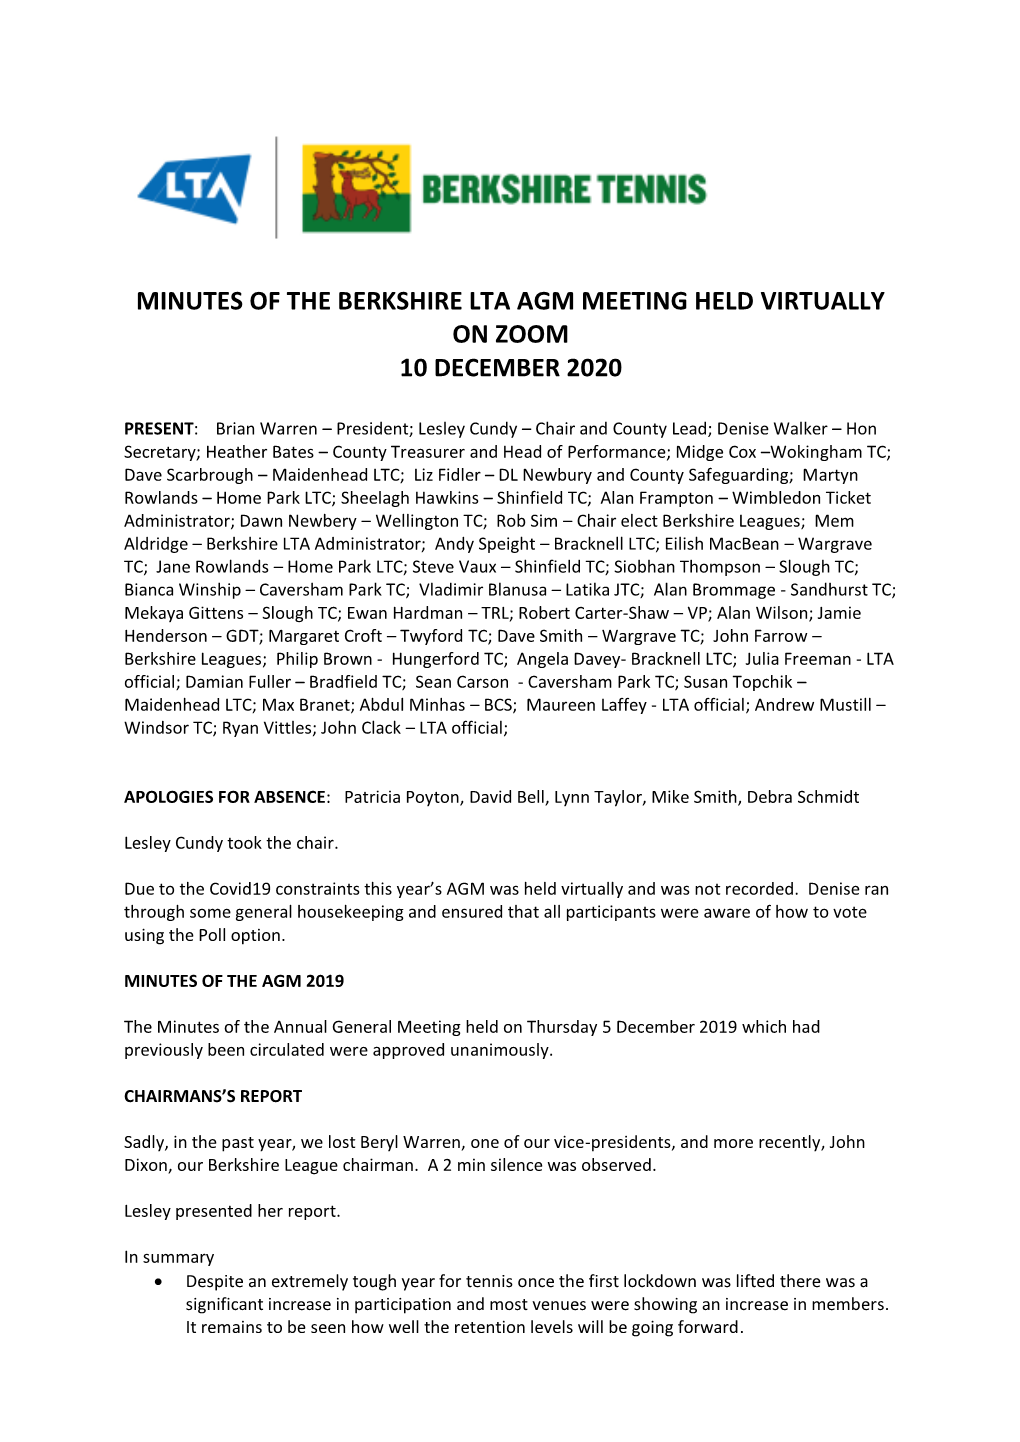 Minutes of the Berkshire Lta Agm Meeting Held Virtually on Zoom 10 December 2020